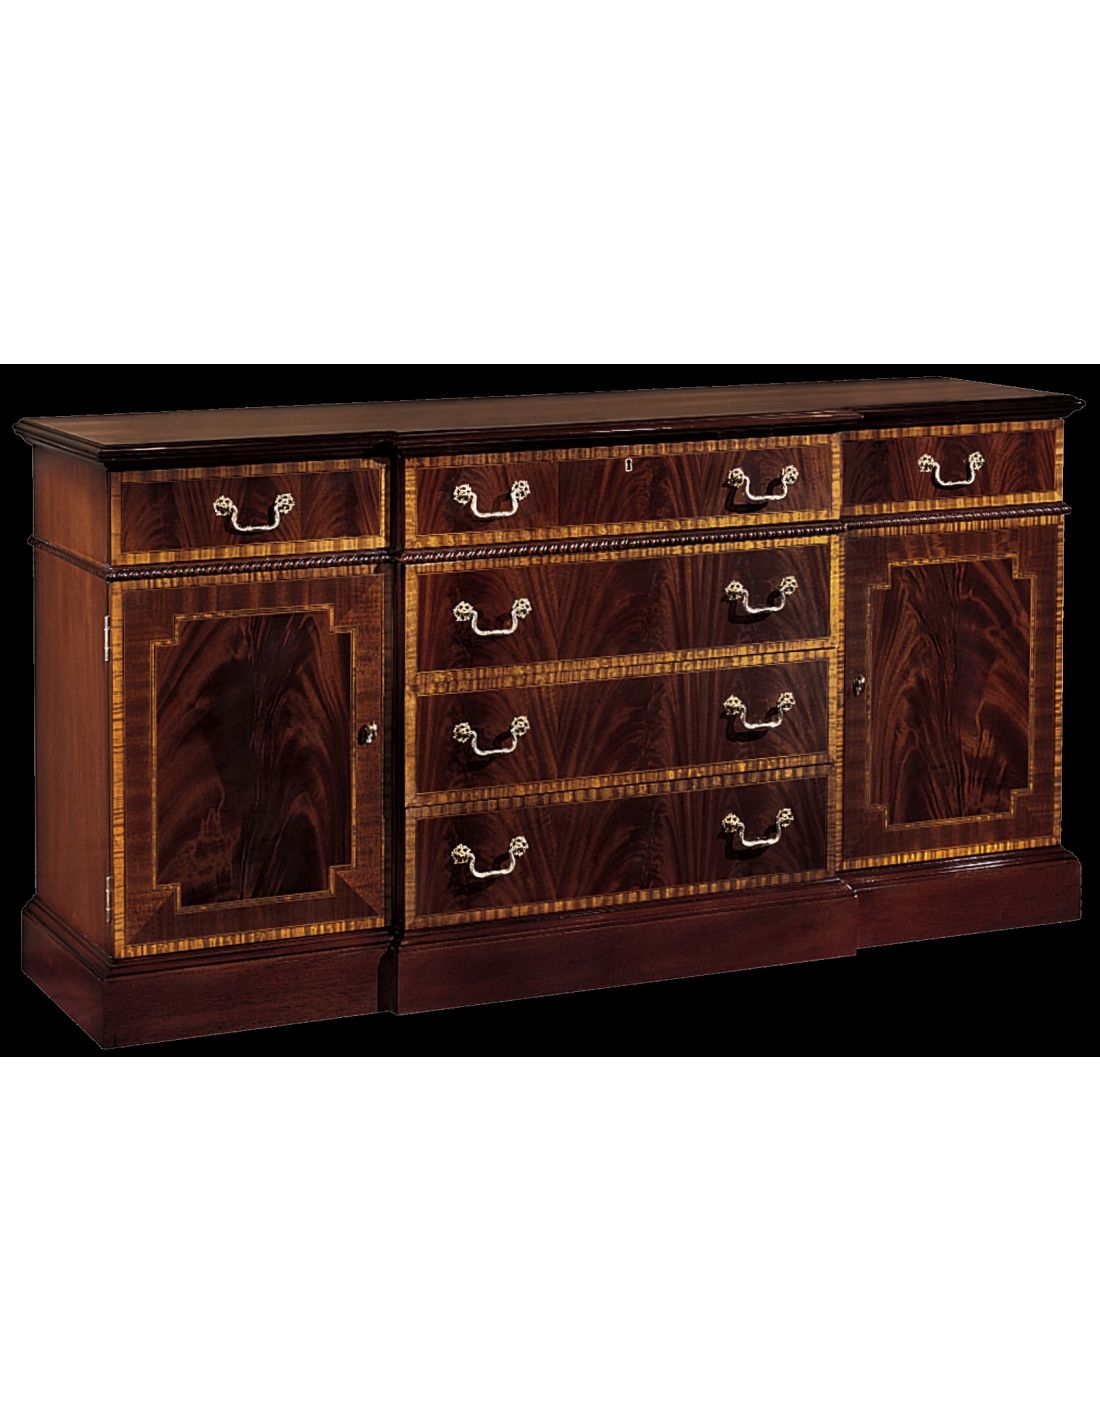 Buffet cabinet. American made furniture and furnishings.